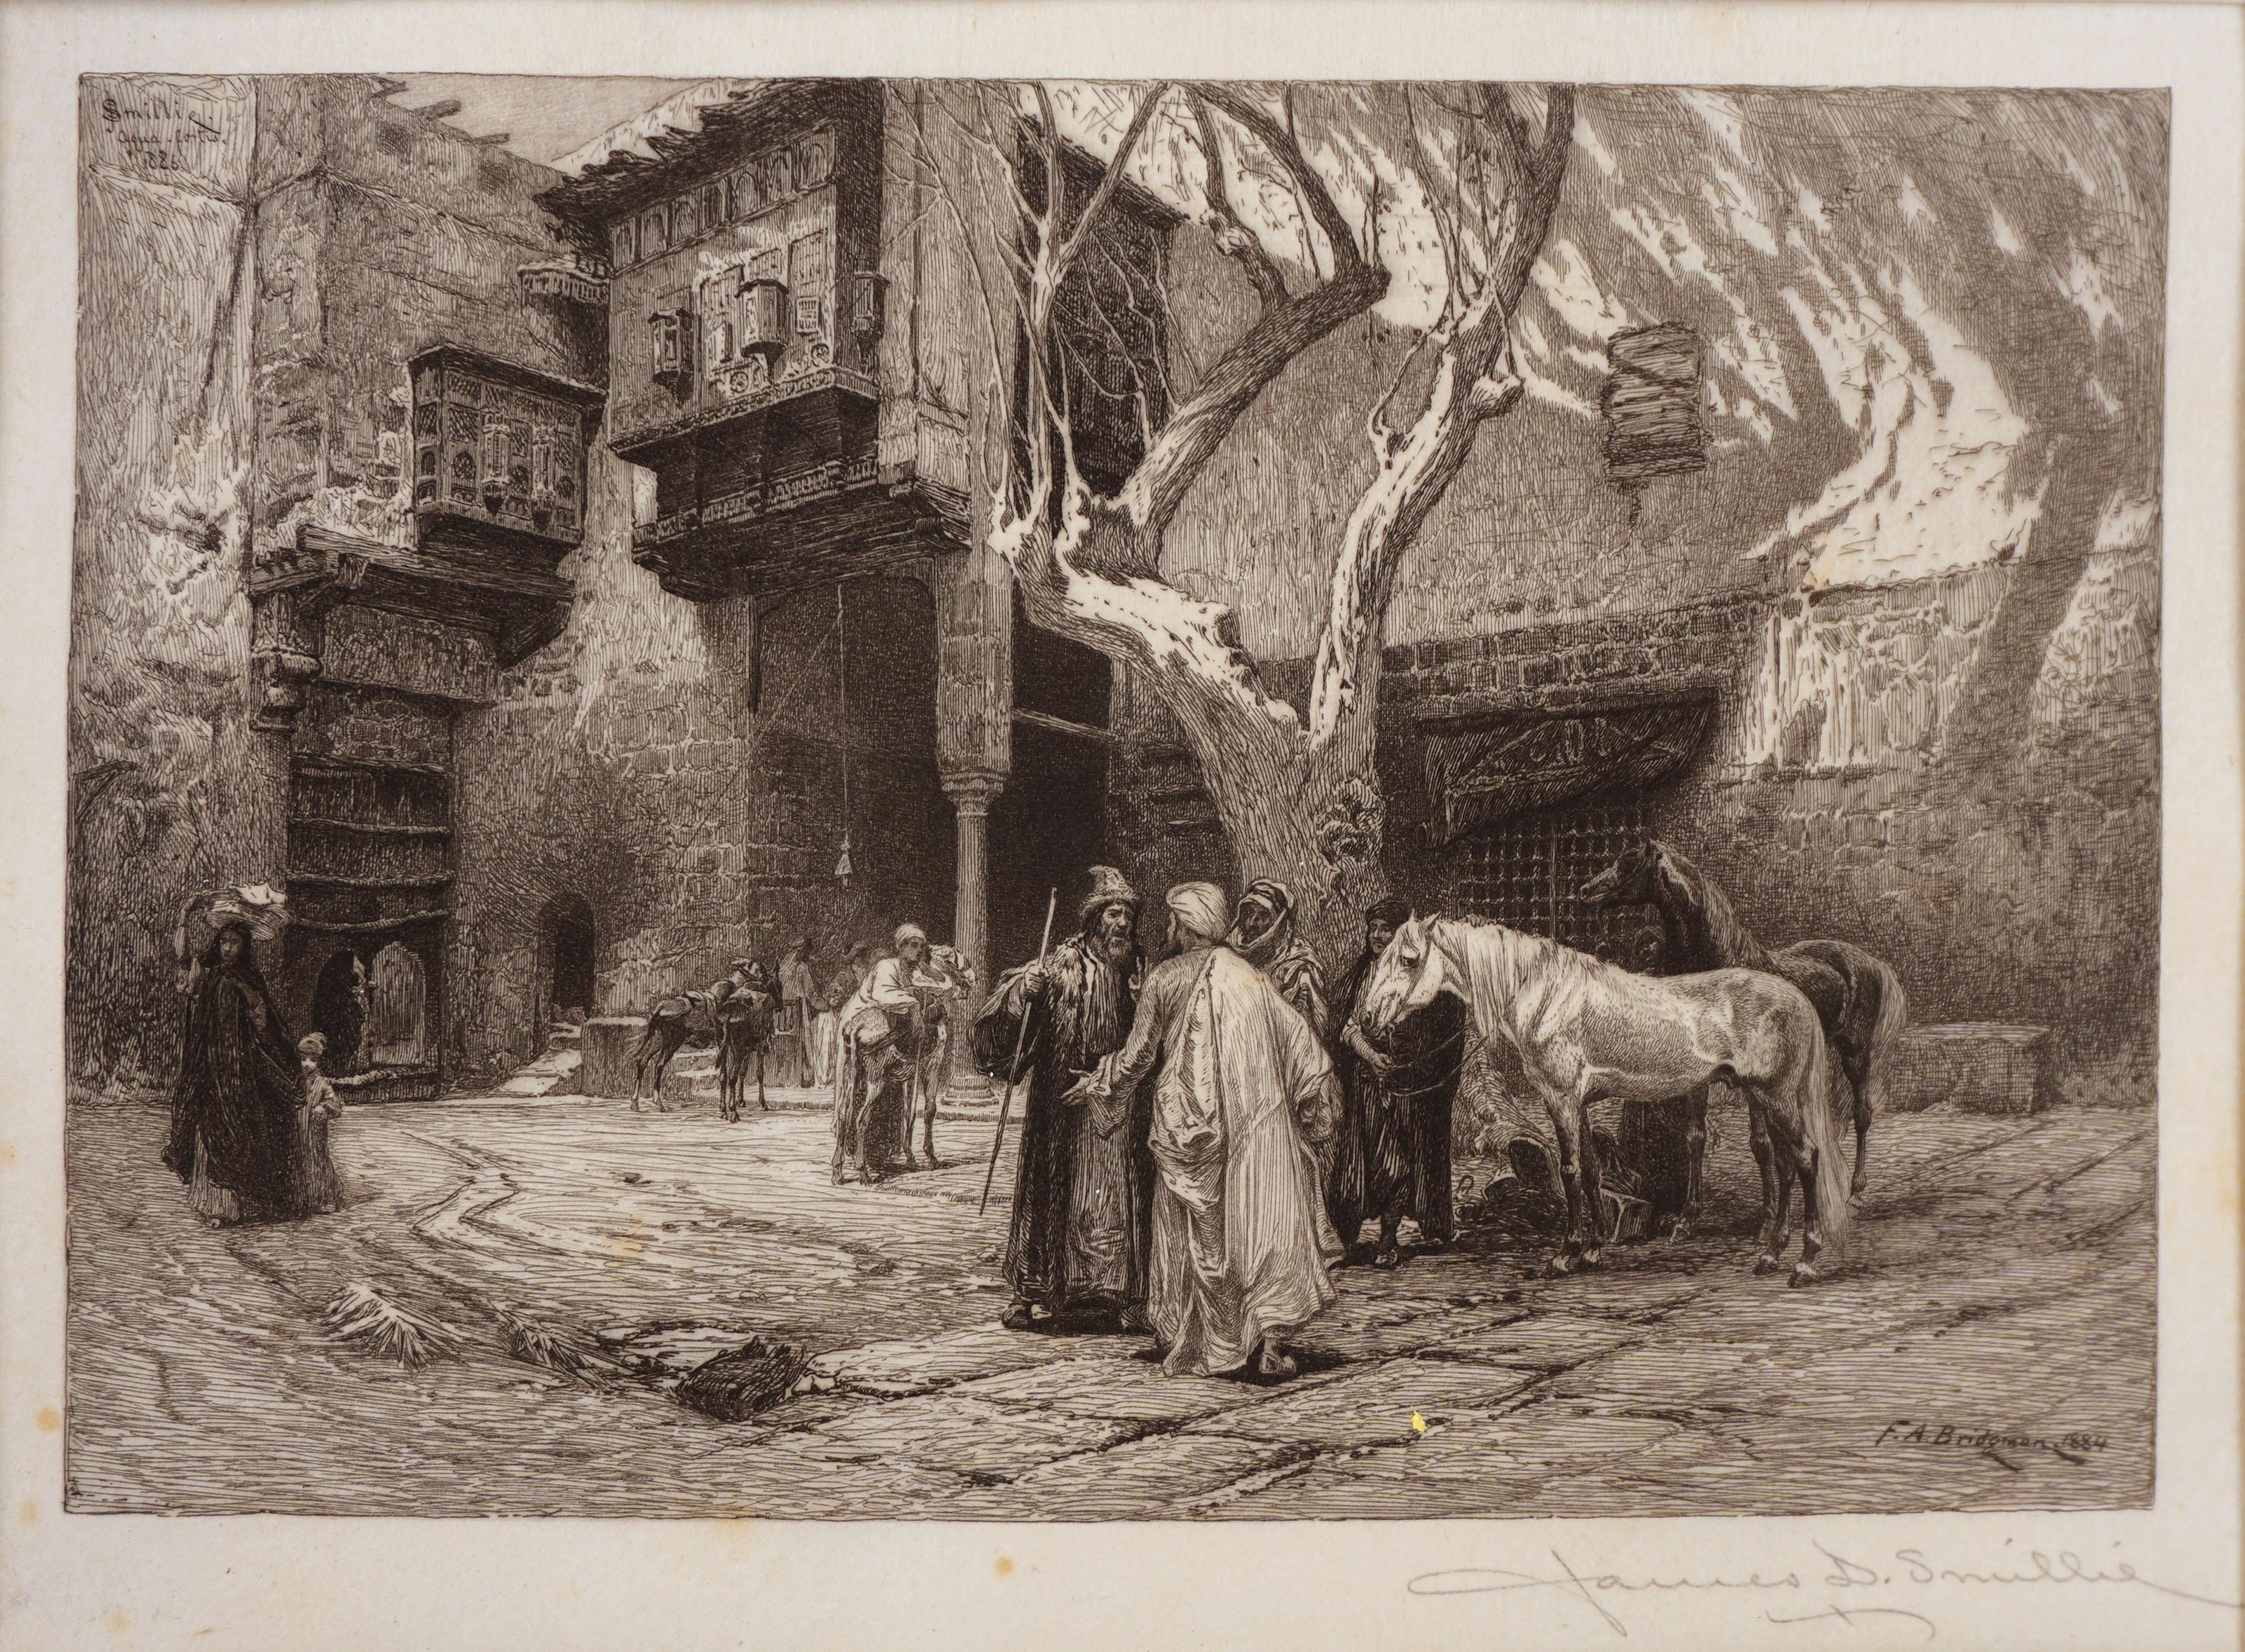 Late 19th Century Engraving -- "A Hot Bargain" Painting by Frederick Bridgman